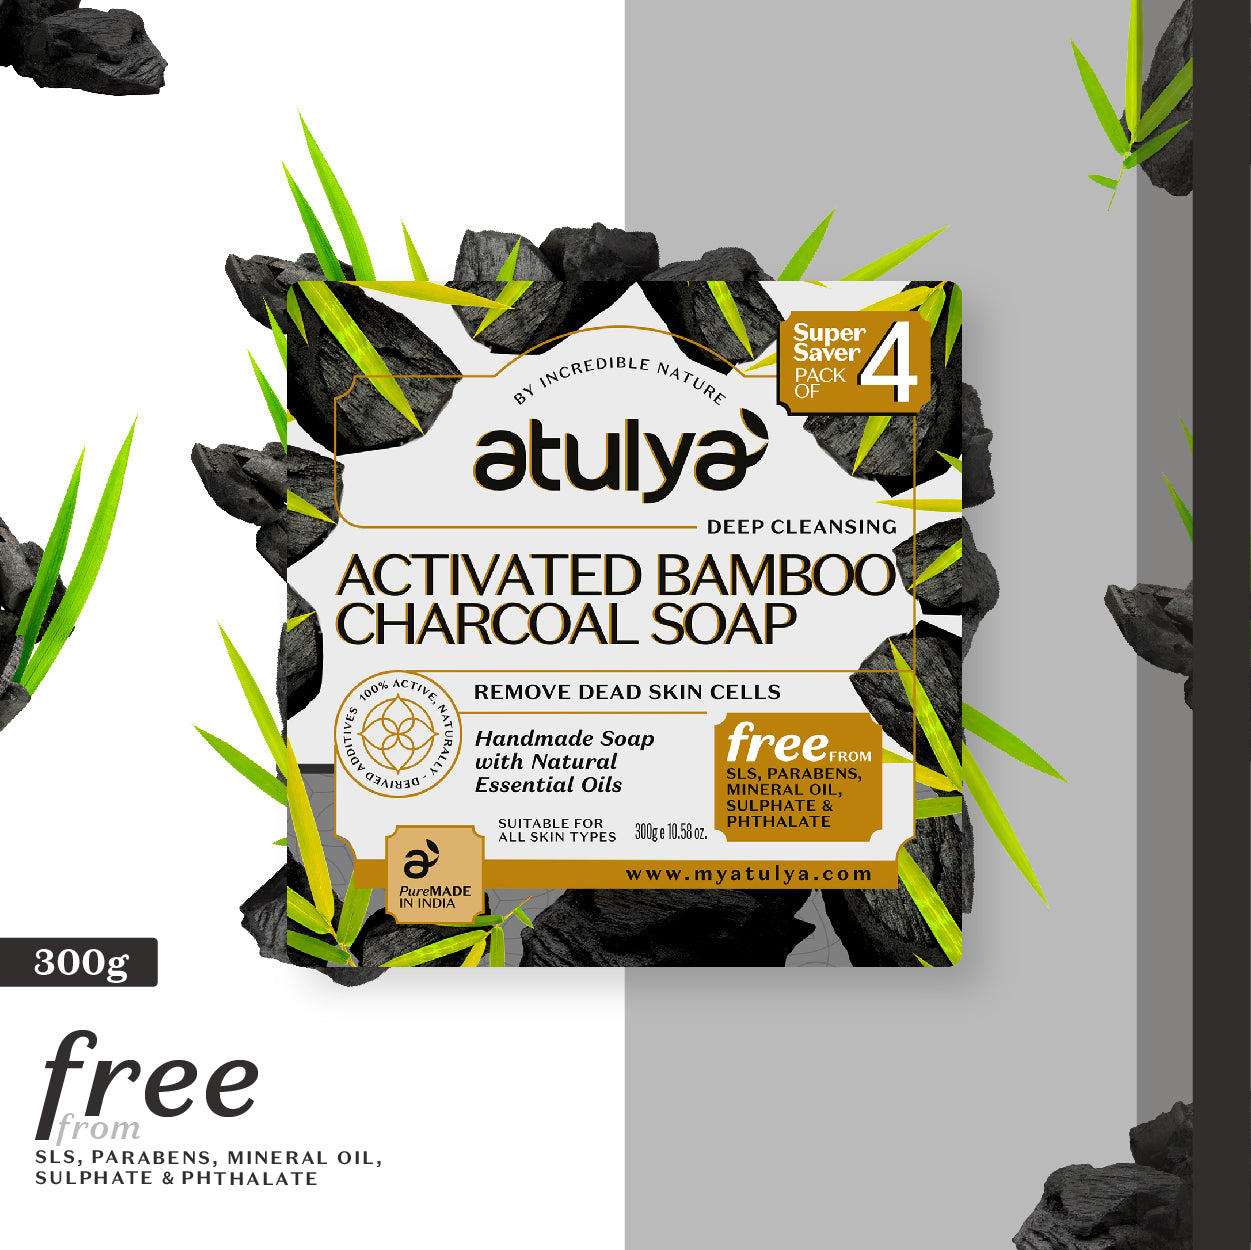 atulya Activated Bamboo Charcoal Soap